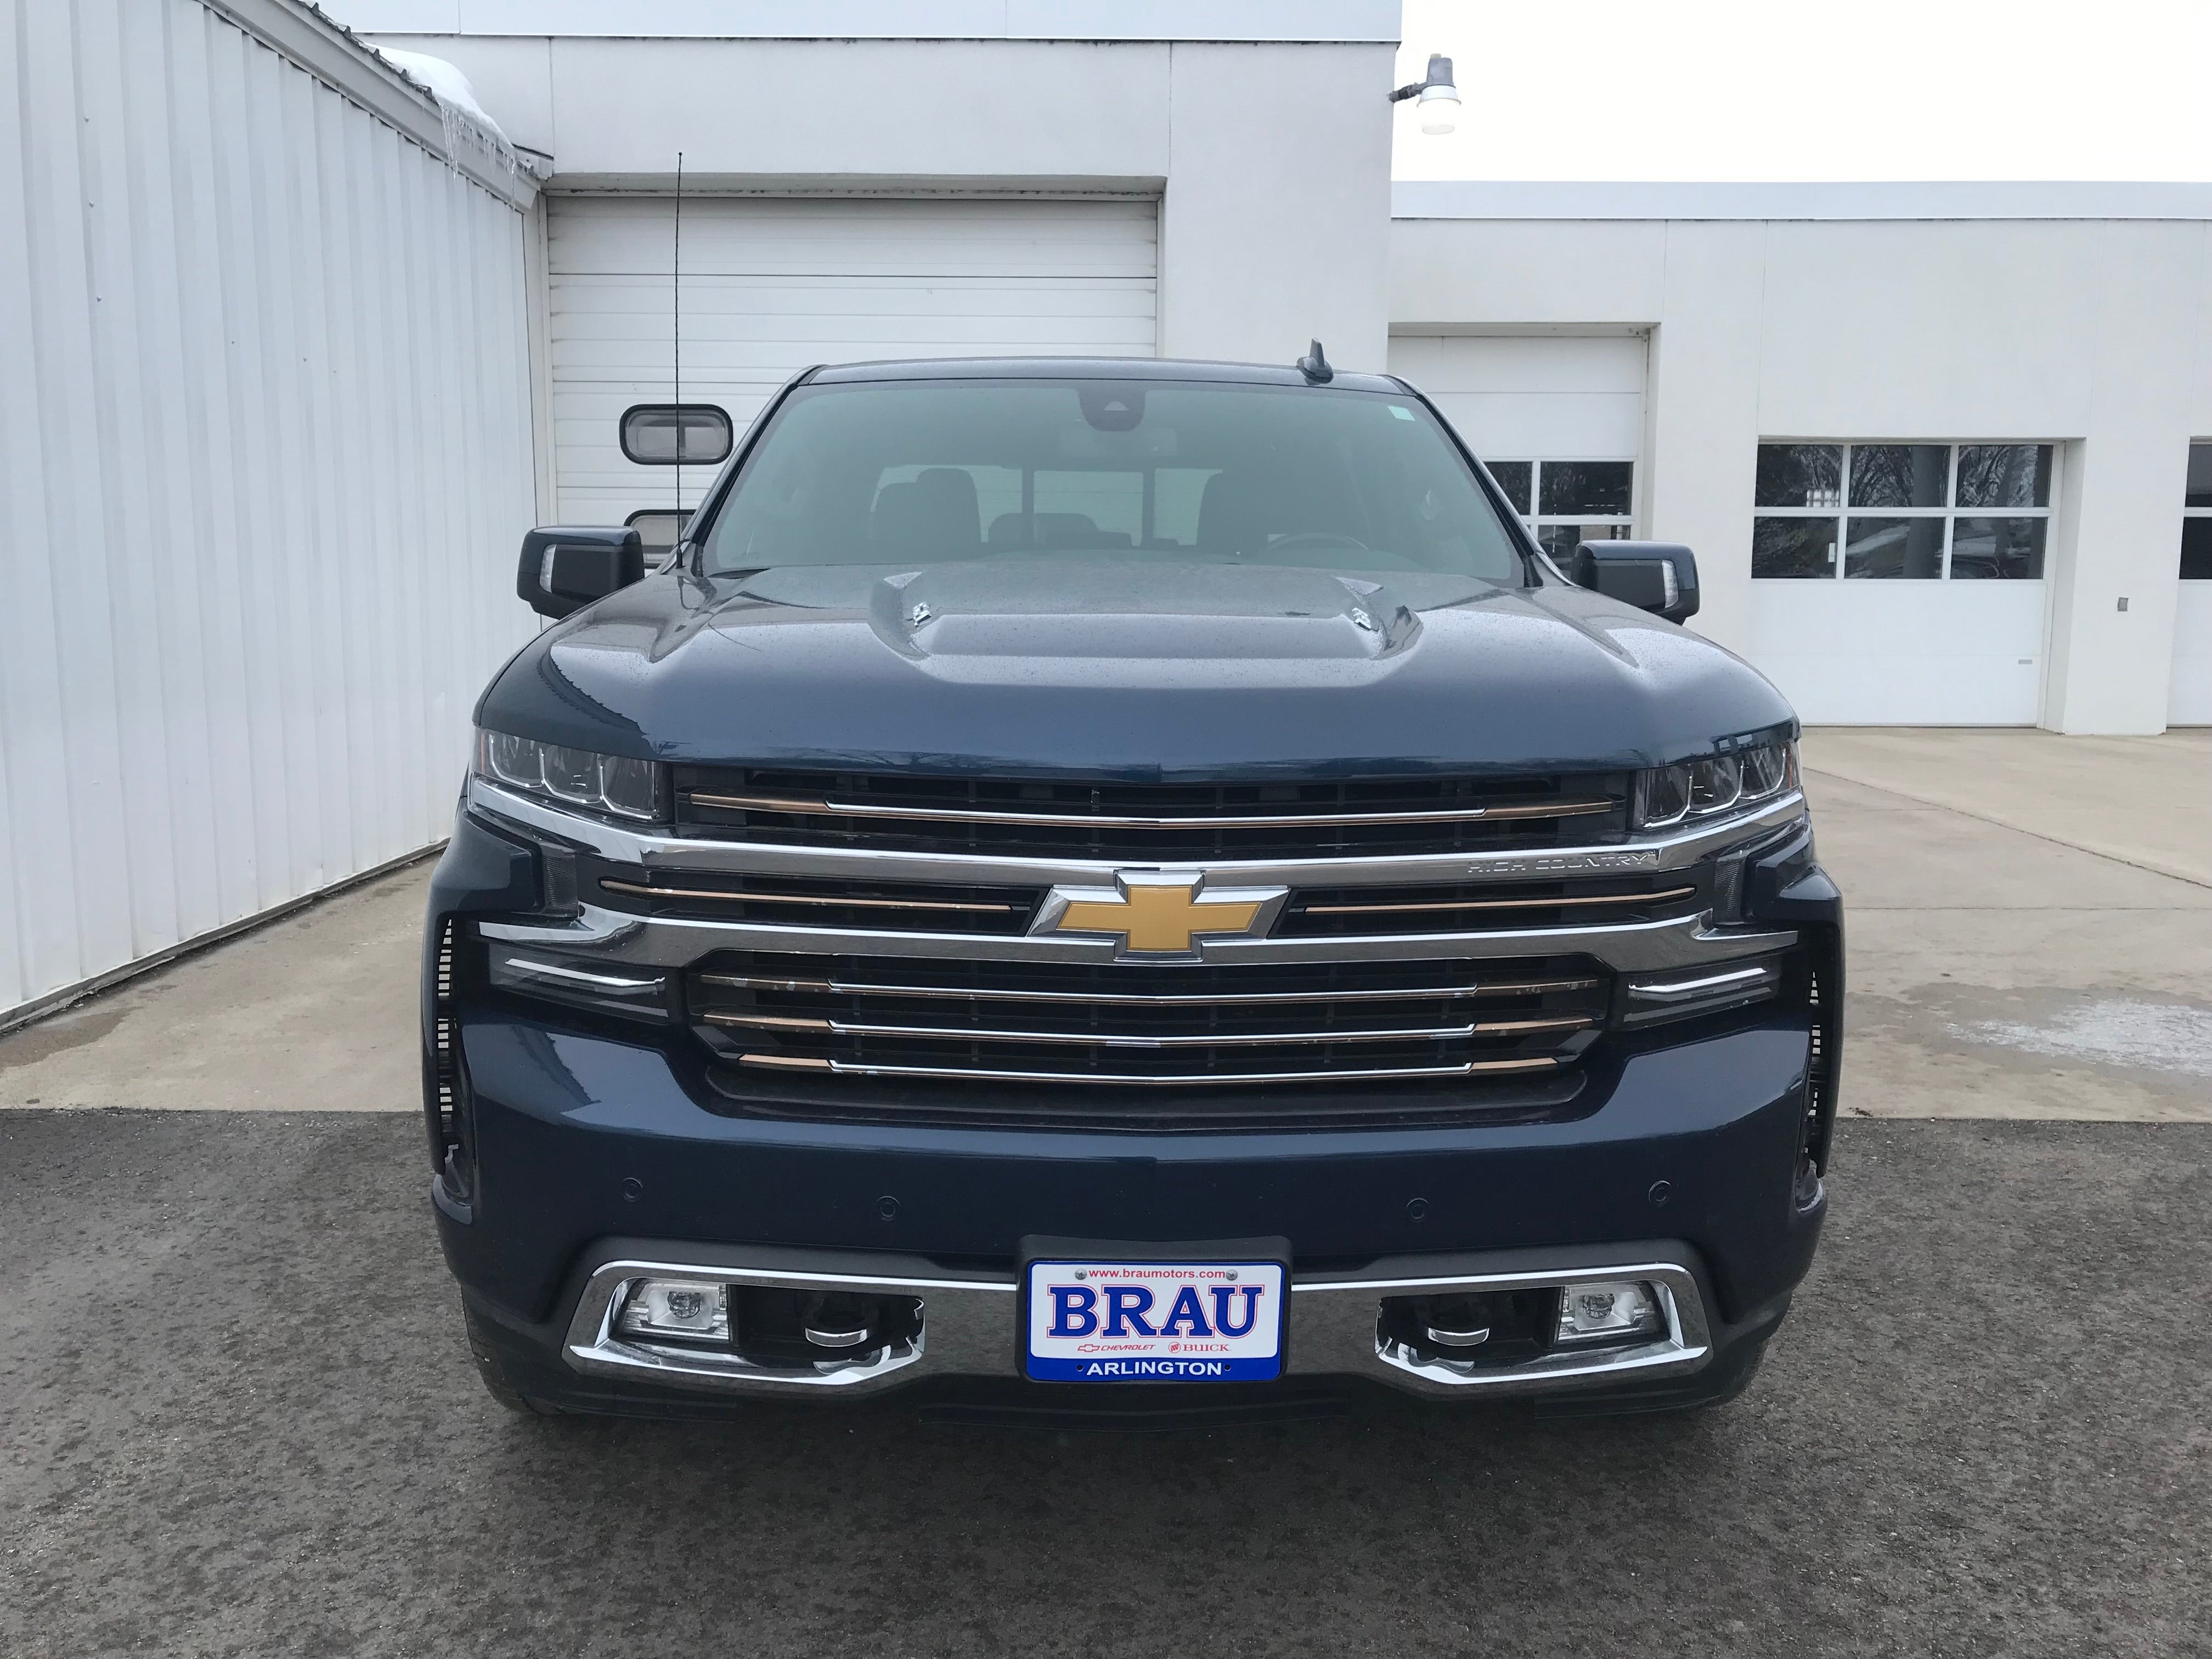 Certified 2019 Chevrolet Silverado 1500 High Country with VIN 1GCUYHEL7KZ209388 for sale in Arlington, Minnesota